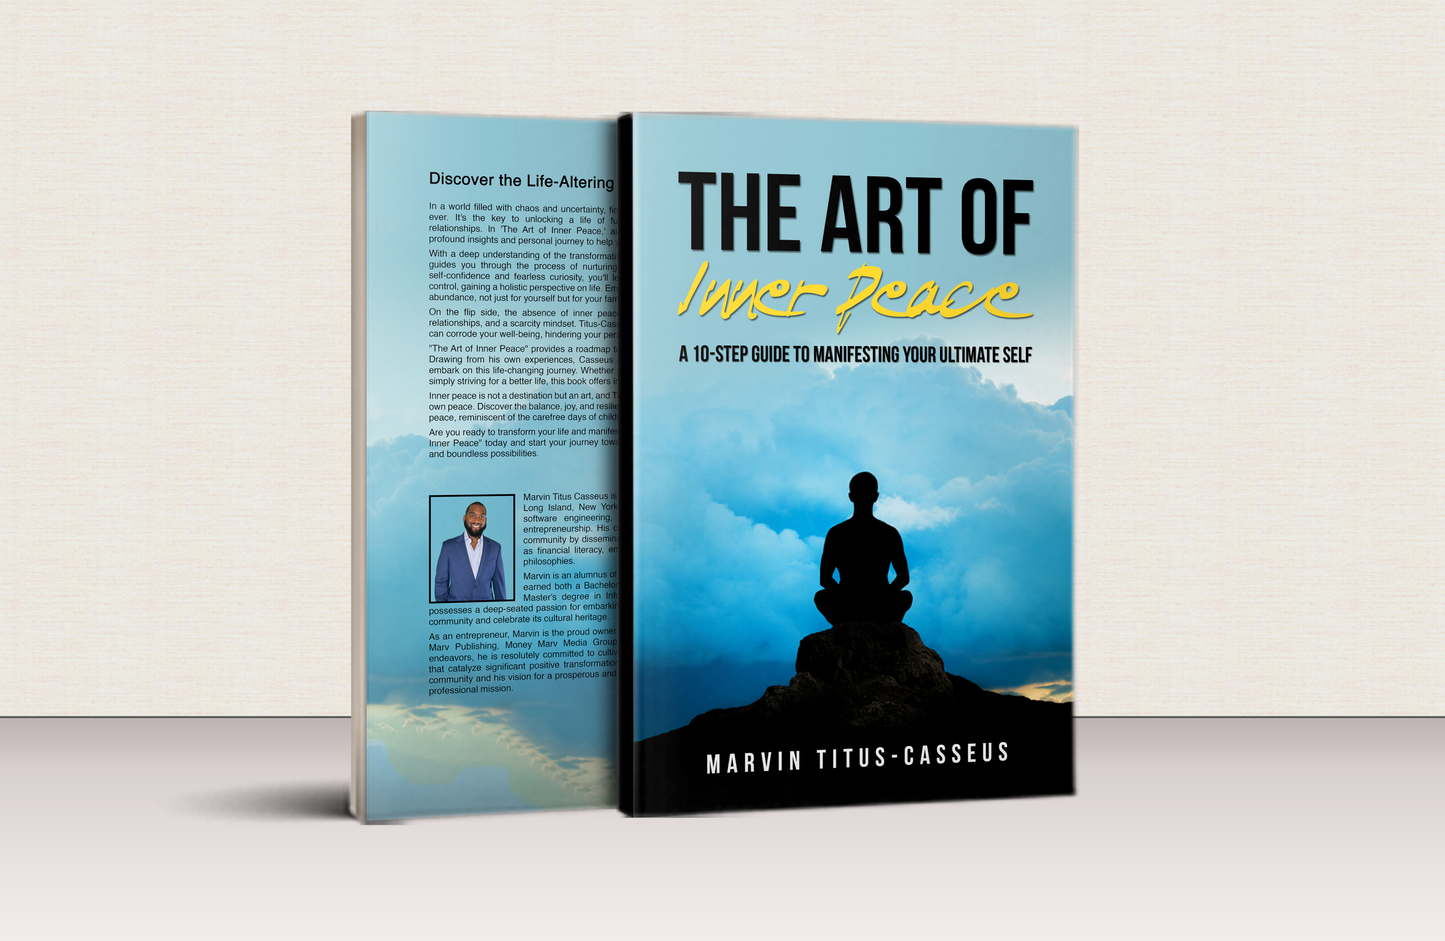 The Art of Inner Peace: A 10-Step Guide to Manifesting Your Ultimate Self